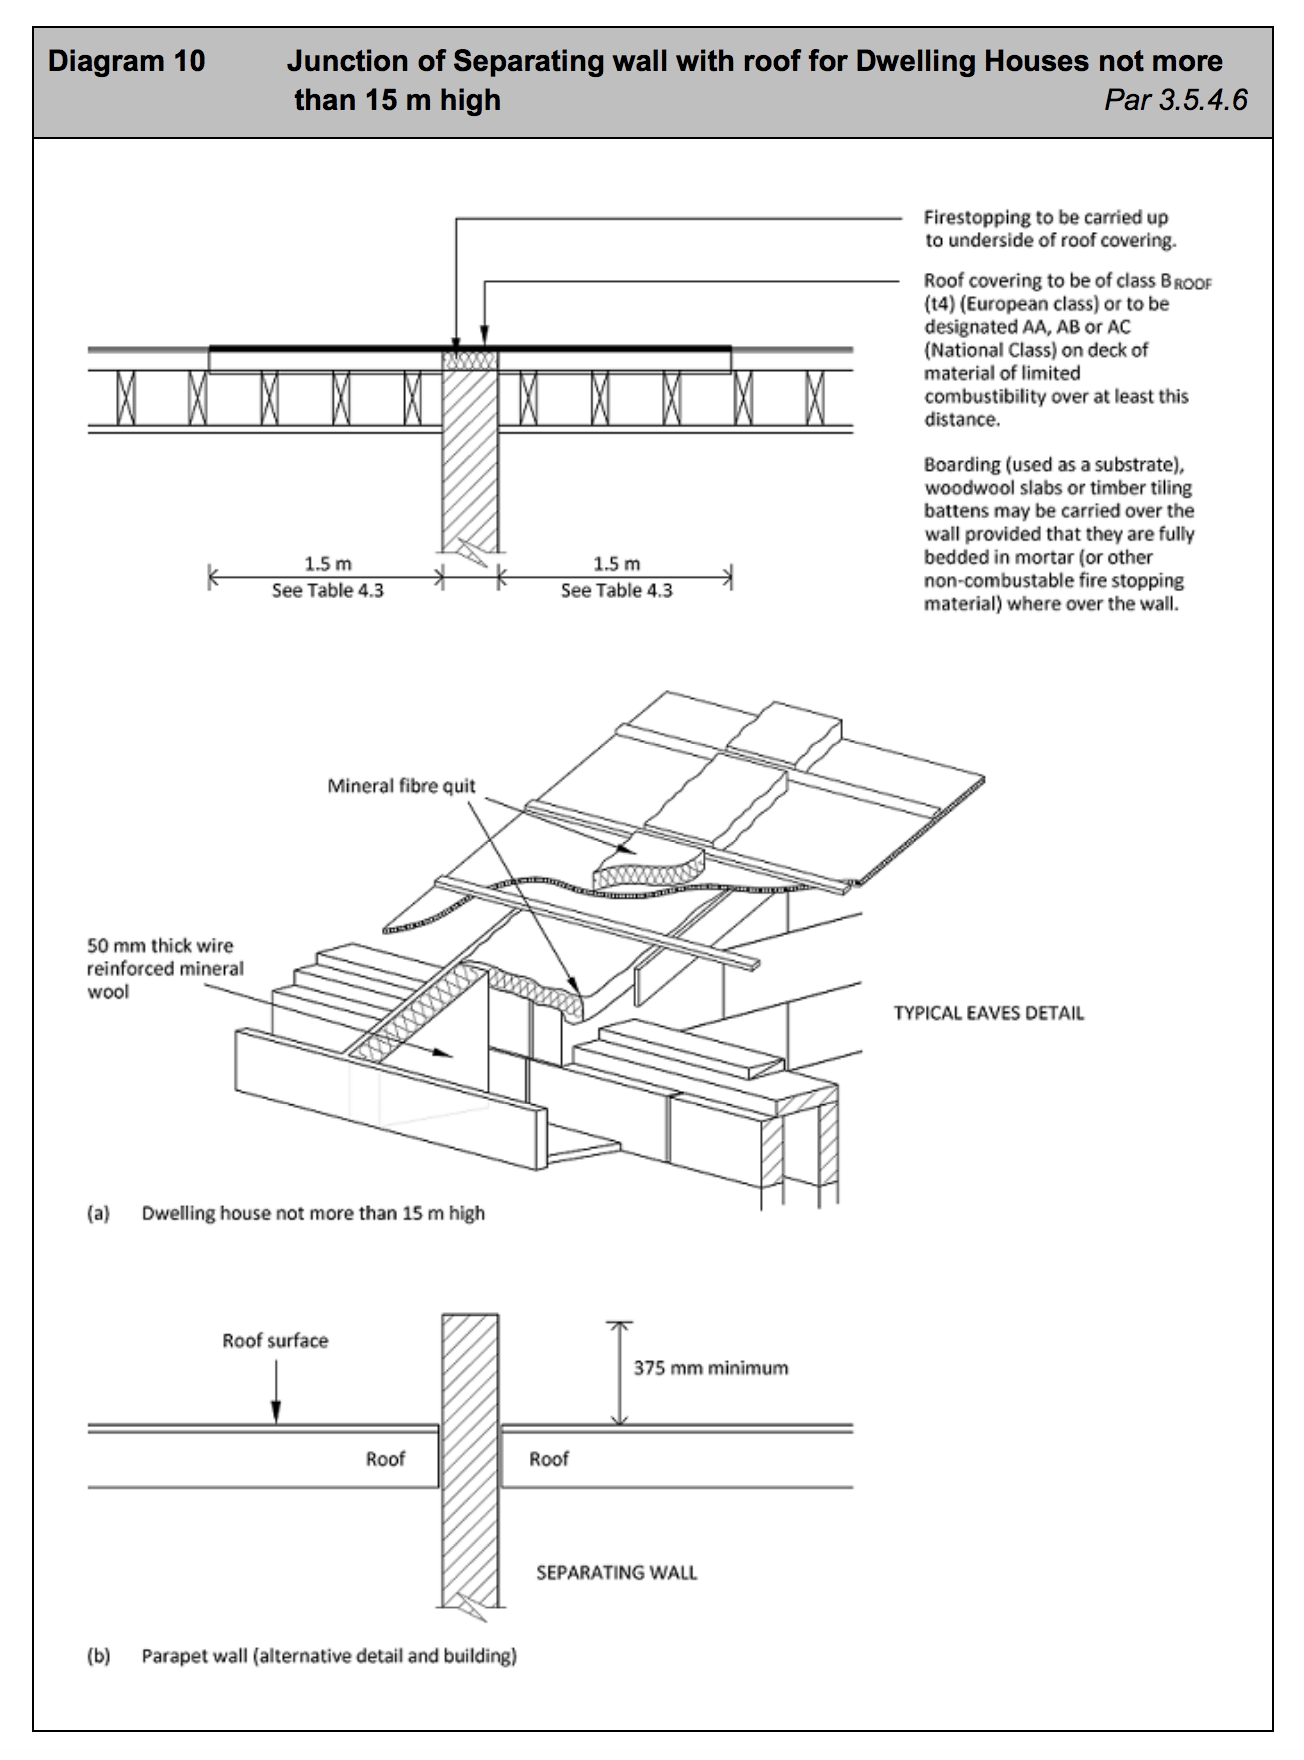 Diagram HB10 - Junction of separating wall with roof for dwelling houses not more than 15 m high - Extract from TGD B Vol. 2